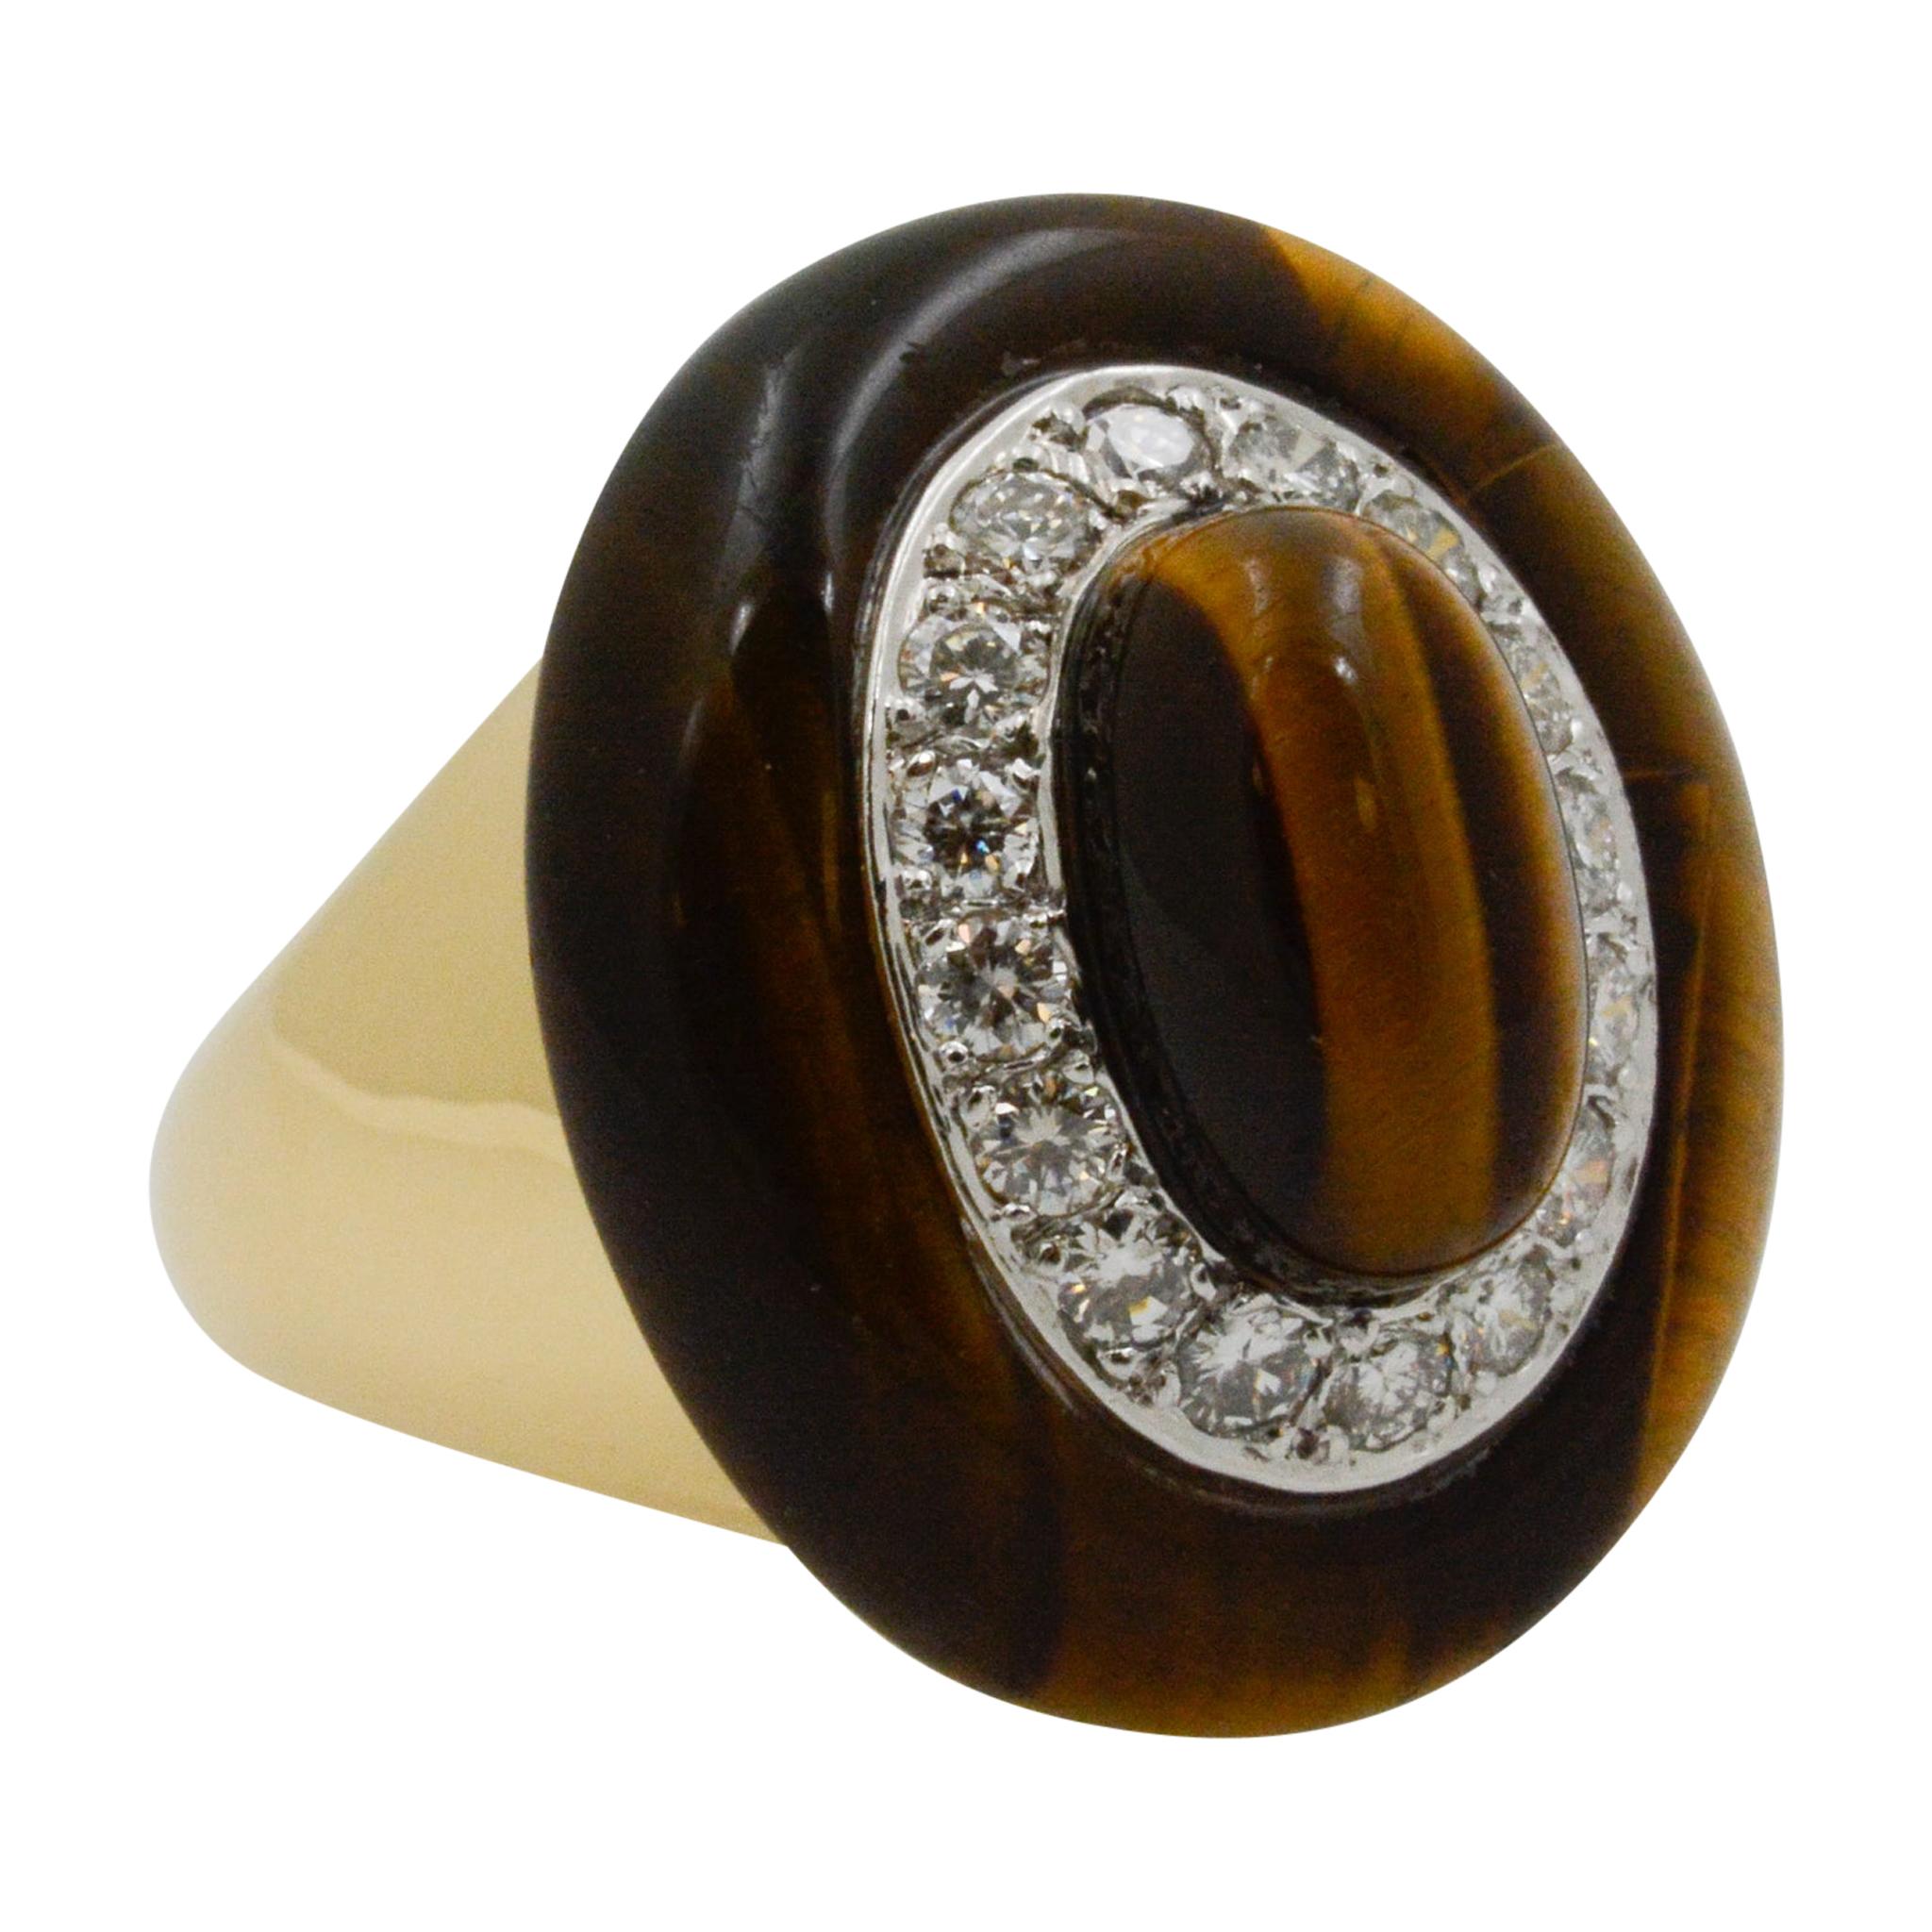 This 18 karat yellow gold ring features a tiger eye surrounded by 16 round brilliant cut diamonds weighing an approximate combined 0.80 carats, with G-H color, and VS clarity. The ring is a size 6. 